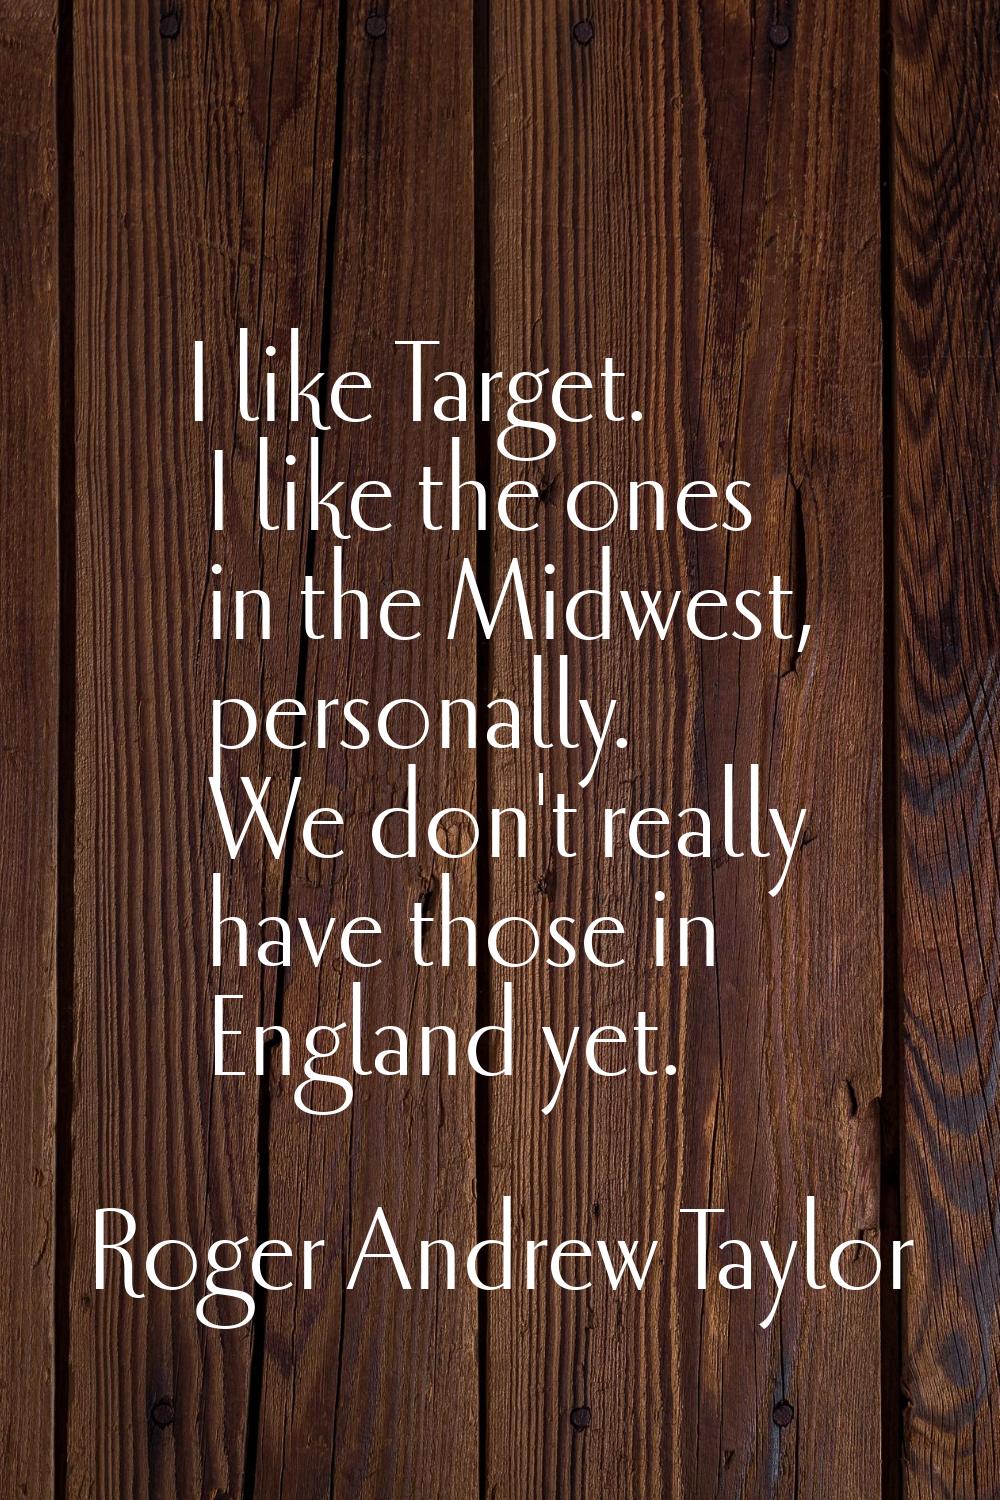 I like Target. I like the ones in the Midwest, personally. We don't really have those in England ye